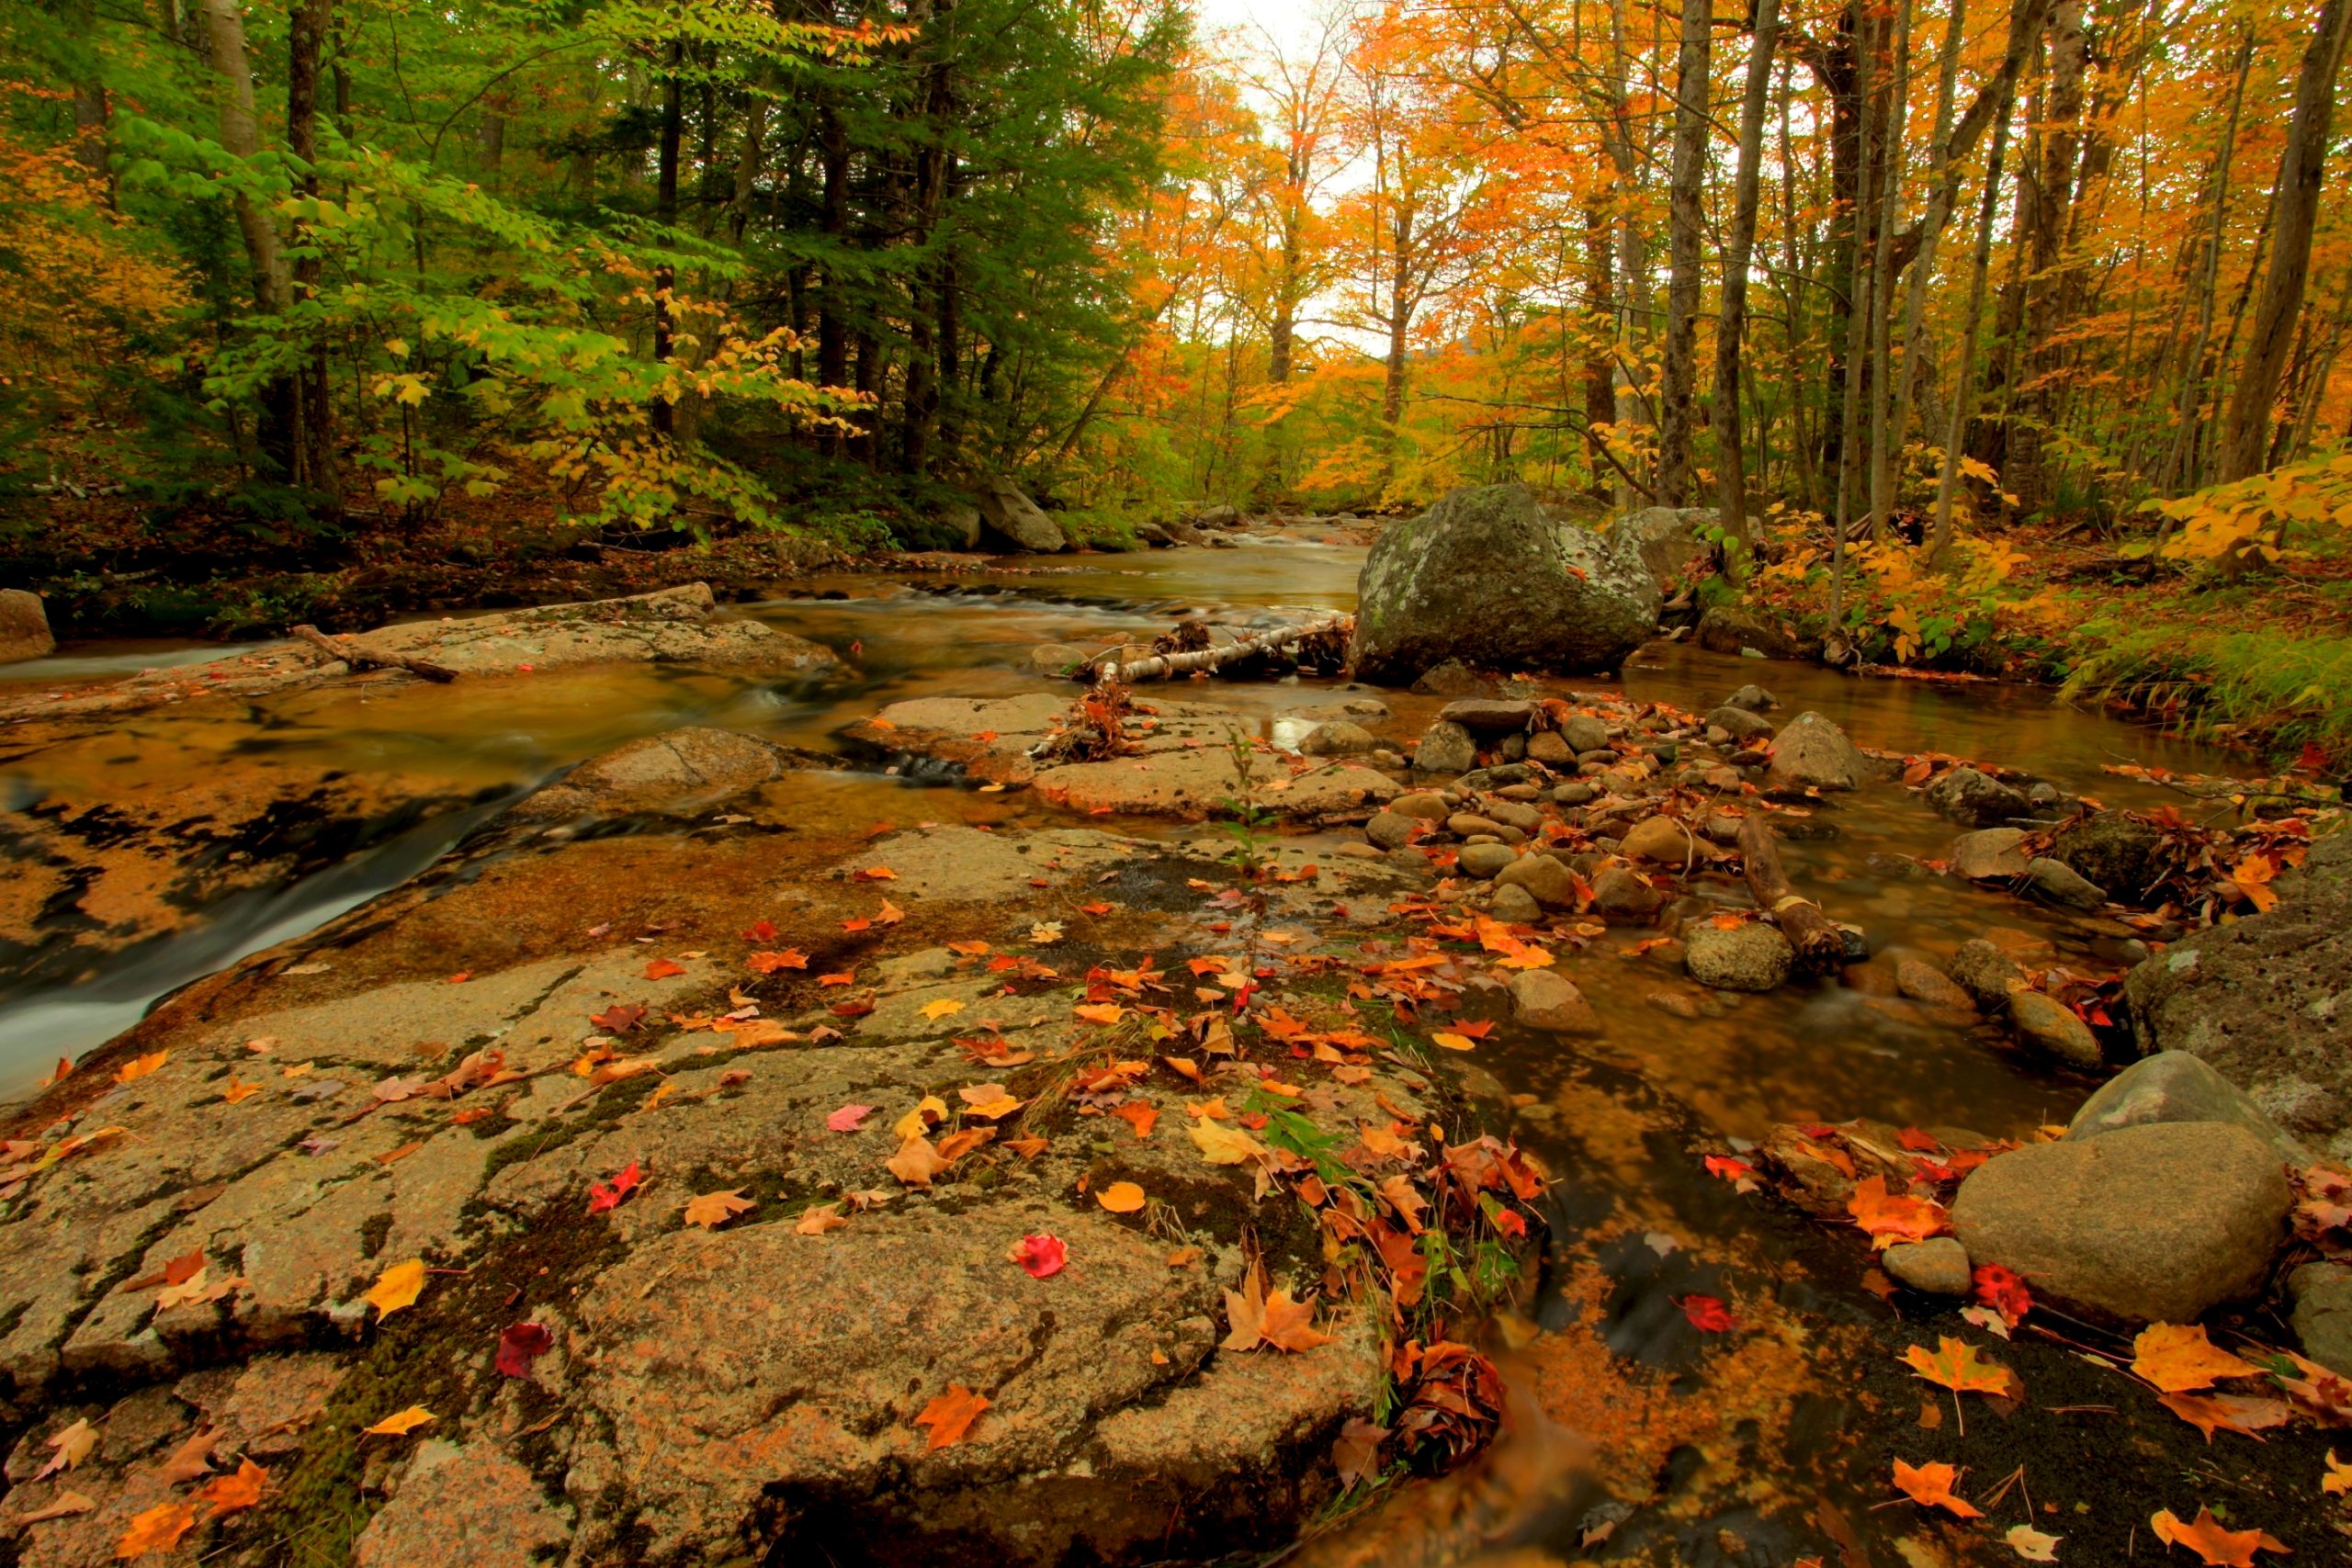 River Sprinkled With Fall Colors (user submitted)